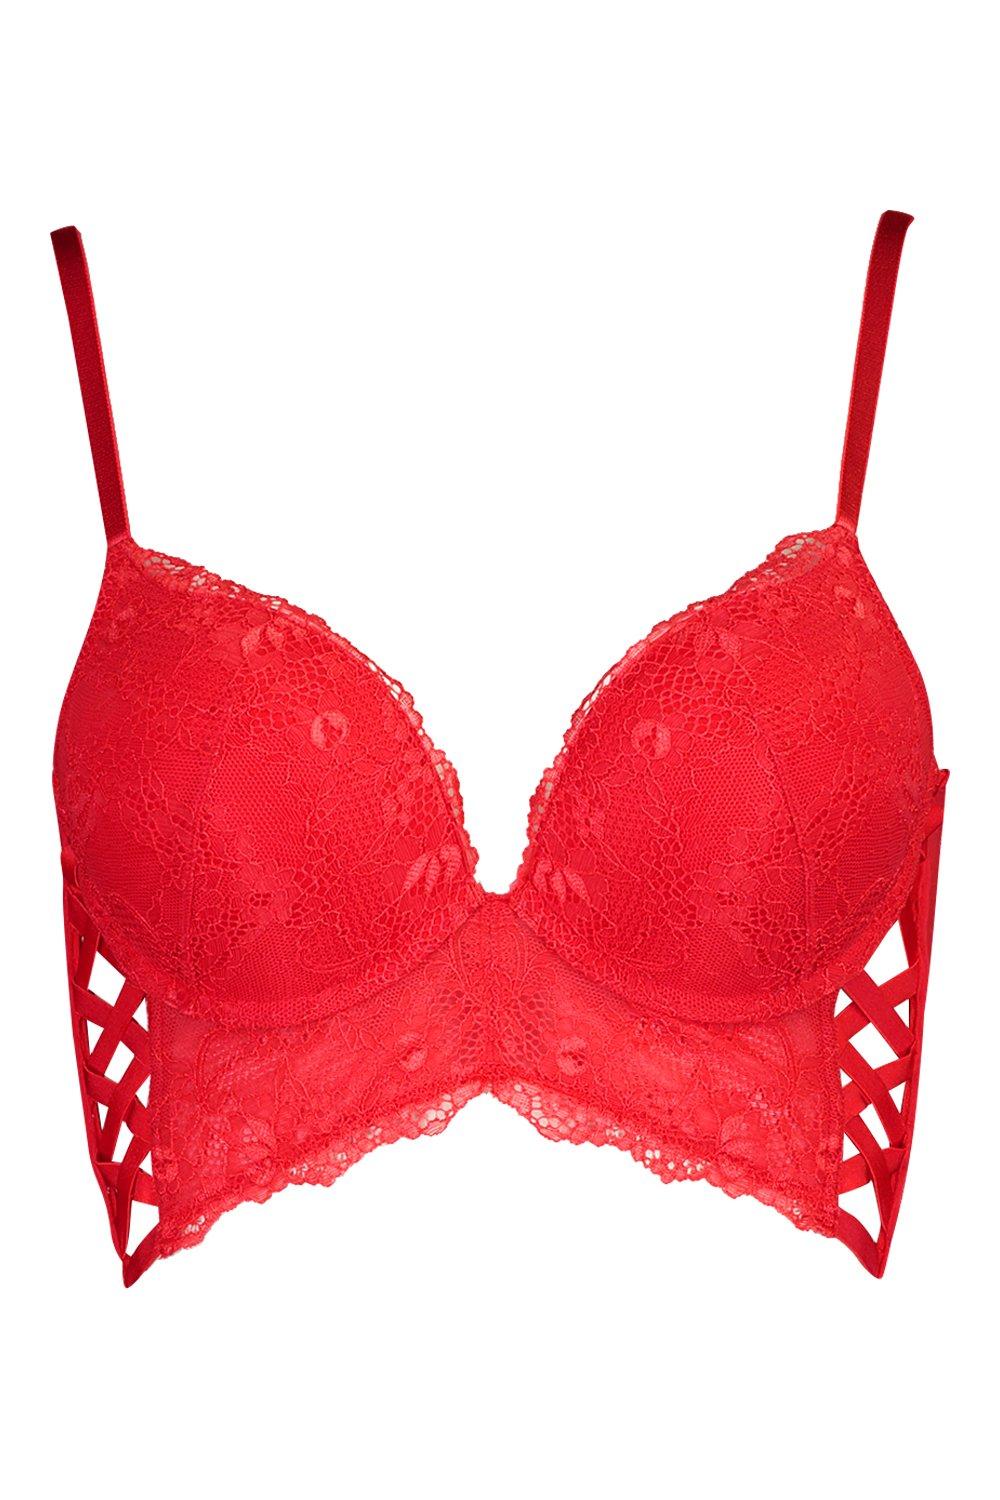 HAIEWRDJ Women's Lace Plus Size Underwired Push Up Adjustable Everyday Bras  (Color : Red, Size : 44D) : : Fashion